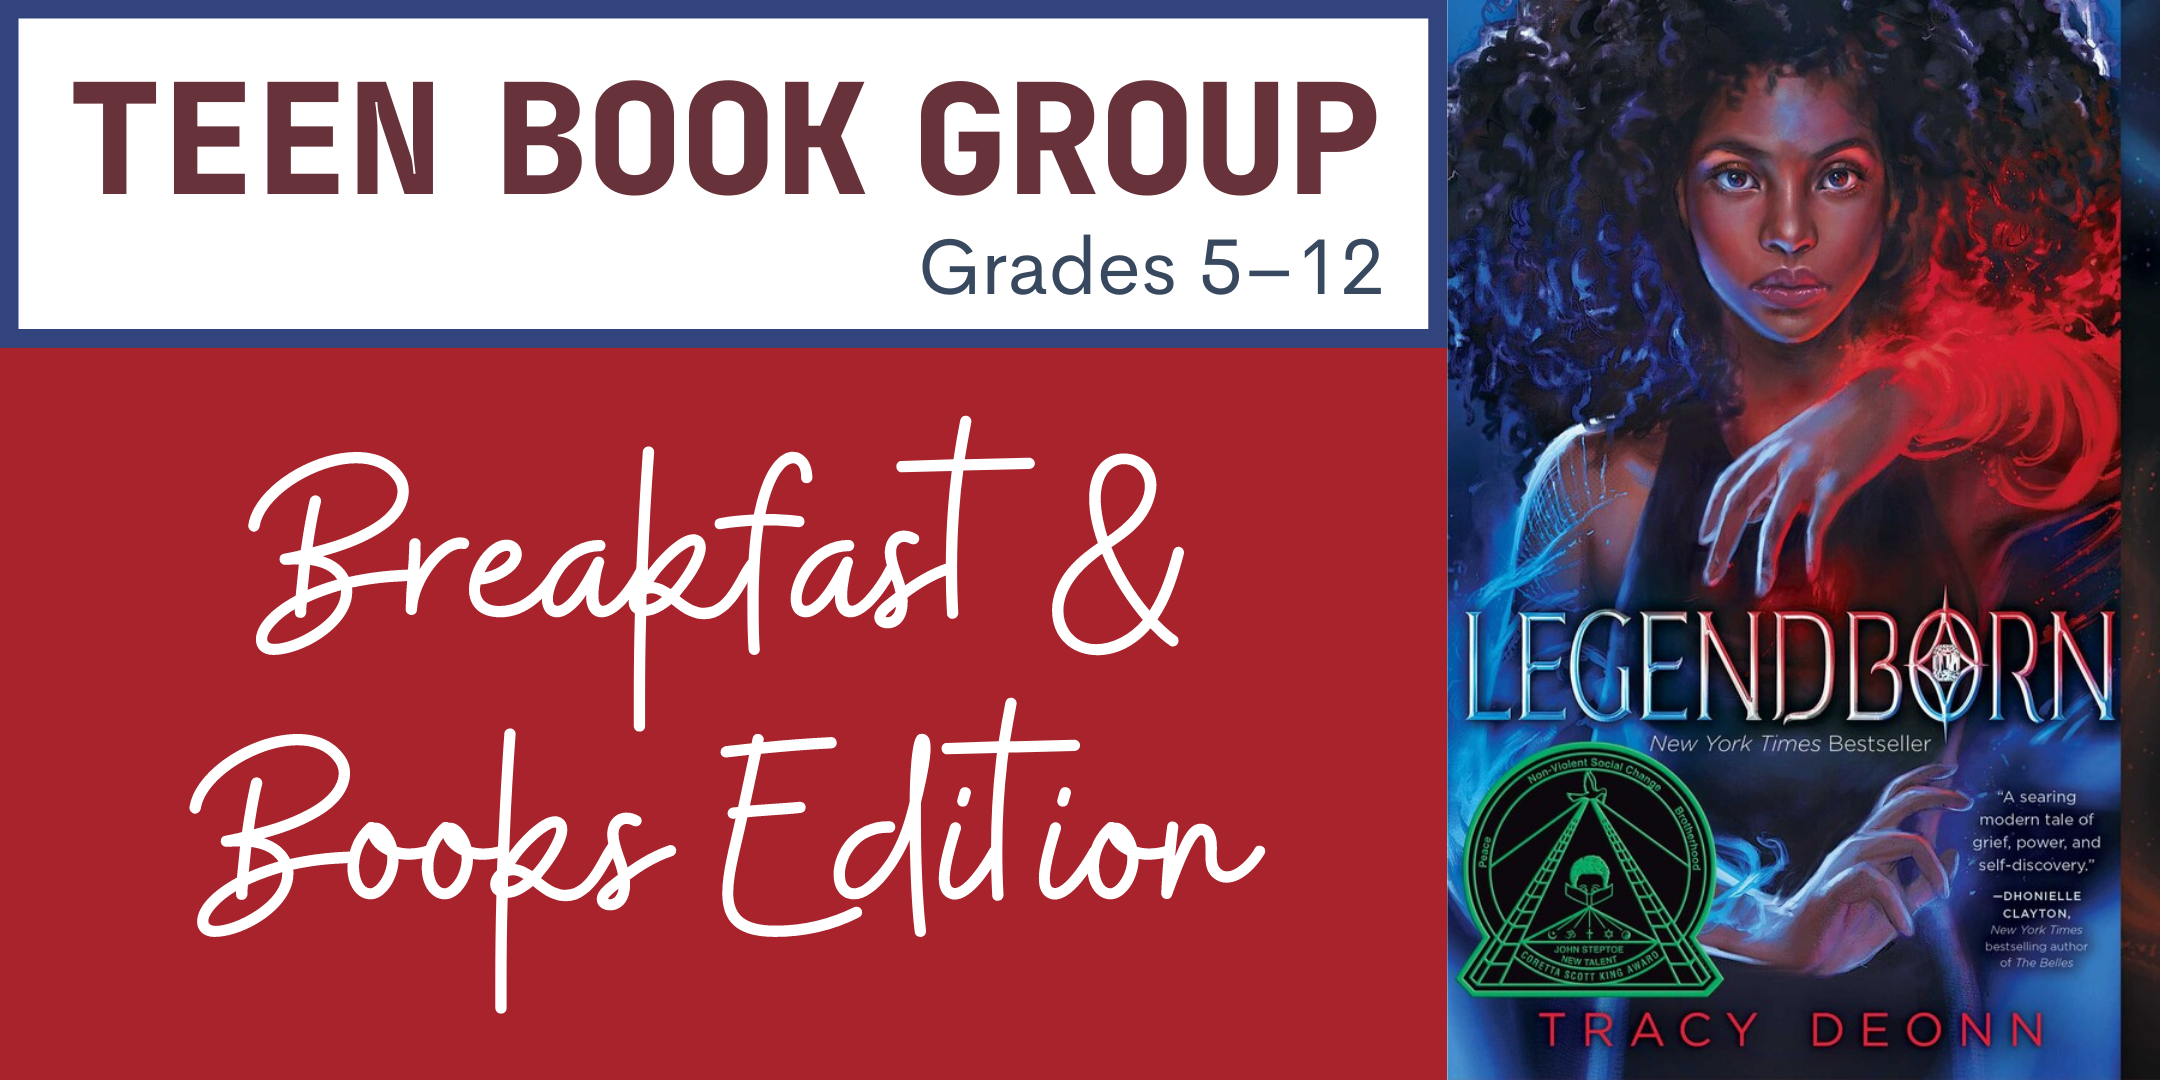 image of text stating Teen Book Group for Grades 5–12: Breakfast & Books Edition in red and blue alternating colors to the left with the Legendborn by Tracy Deonn book cover to the right showing an African American female teenager with her hair down and curly wearing a tank top showing off arms that have lines of magic running through them into a swirling red mass of that magic. The cover is in red, blue, and black varied tones.